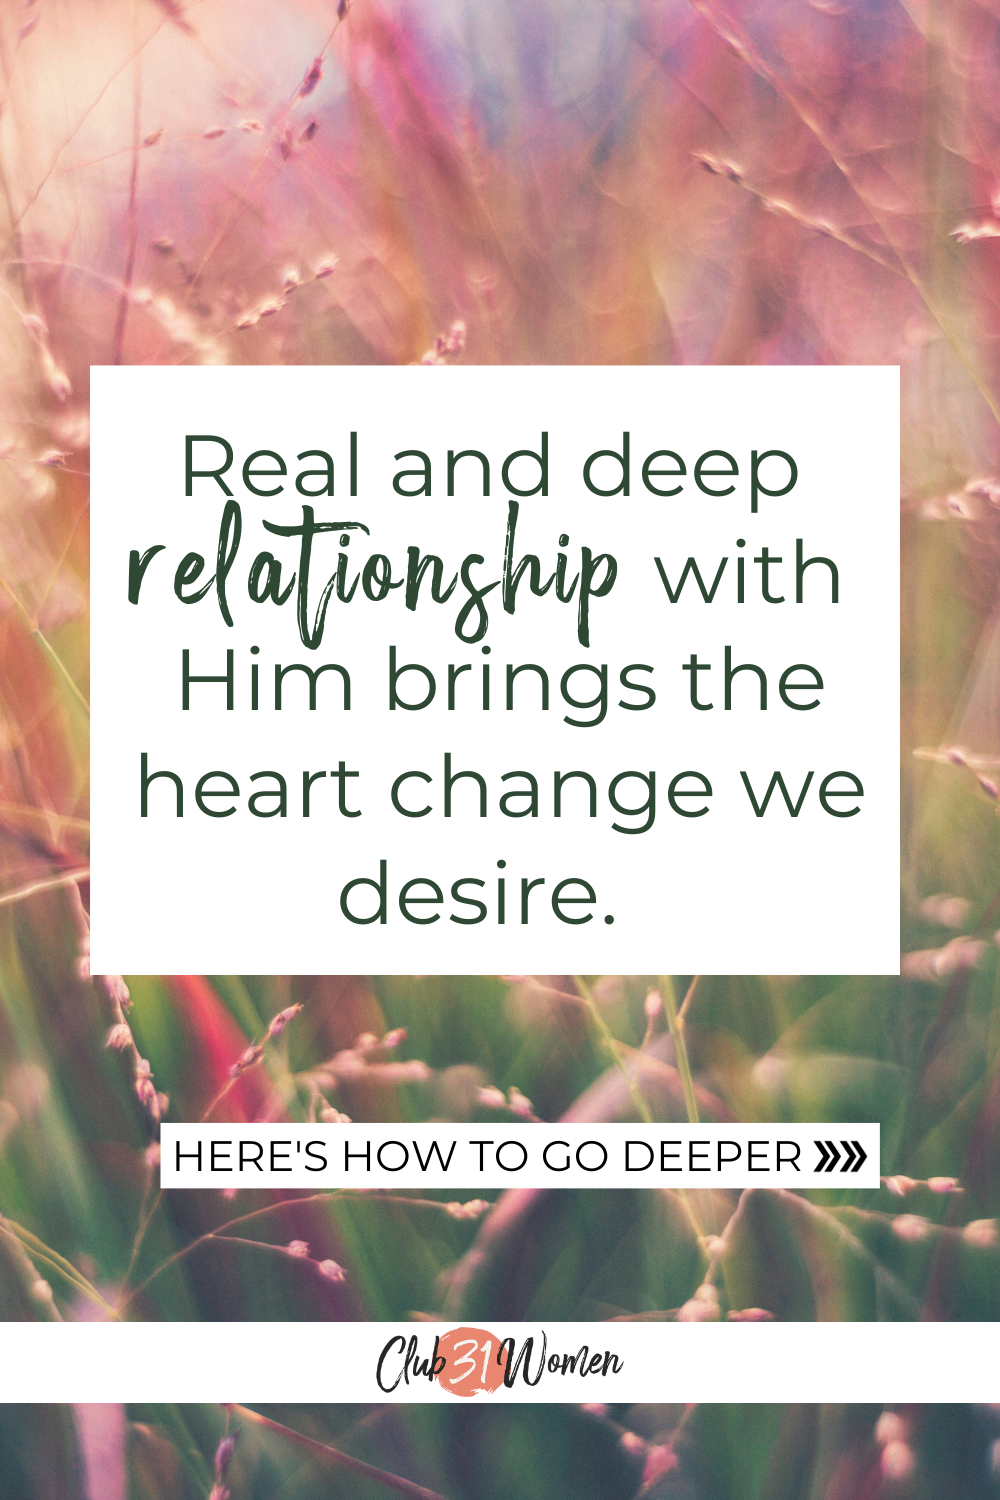 Our spiritual lives need to be fed in order to grow. What happens when we are taking in more than we can digest? How can we be transformed by Him? via @Club31Women